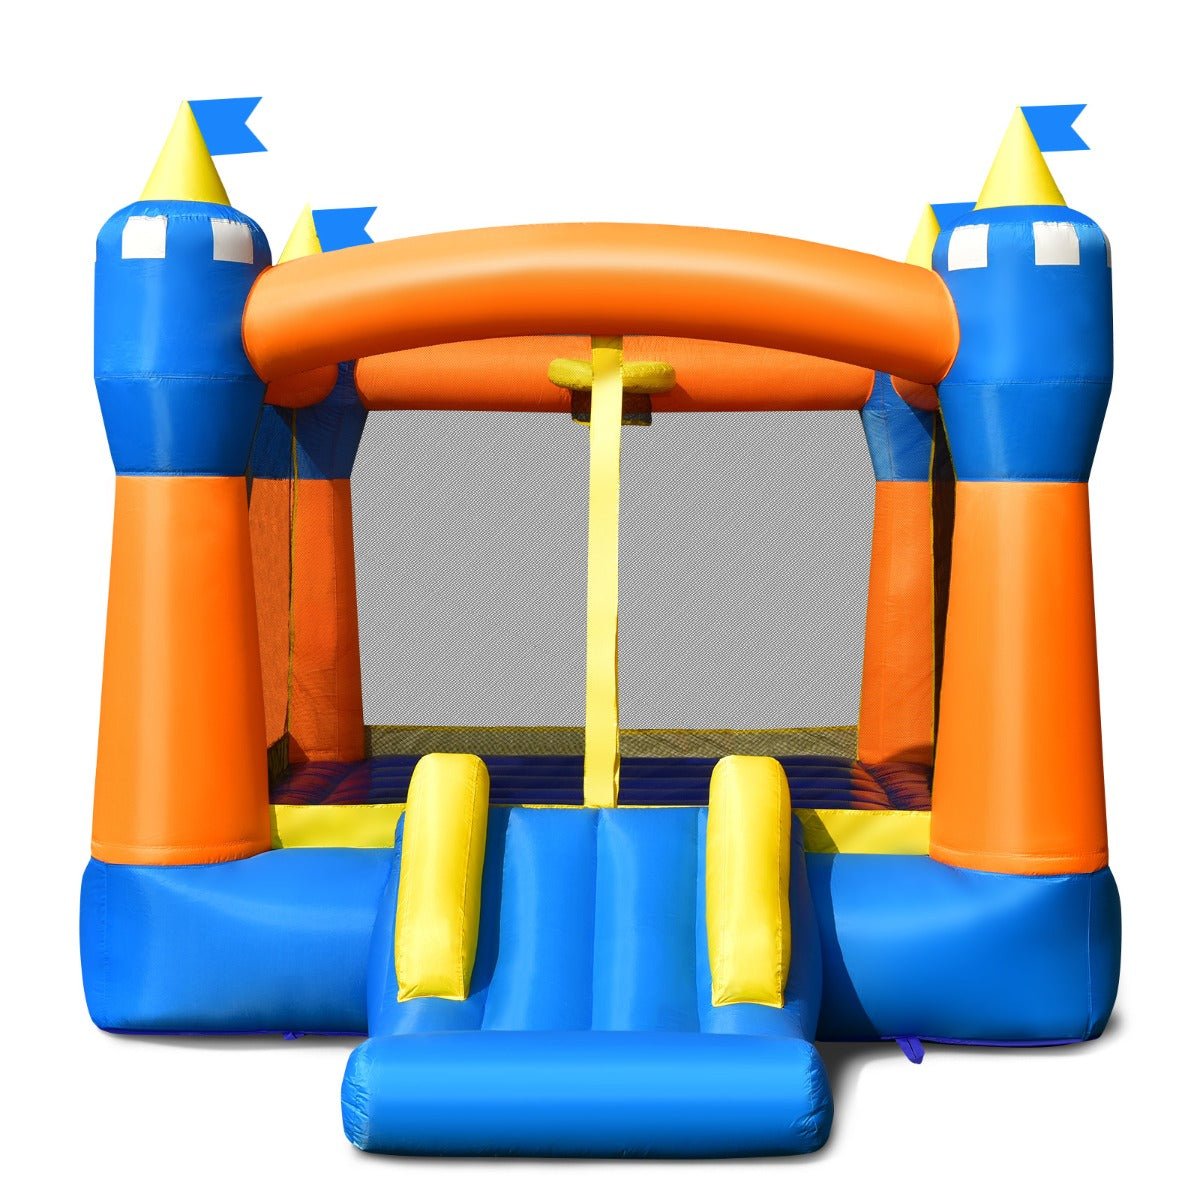 Kids Slide and Bounce House with Basketball Rim - Inflatable Fun (No Blower)